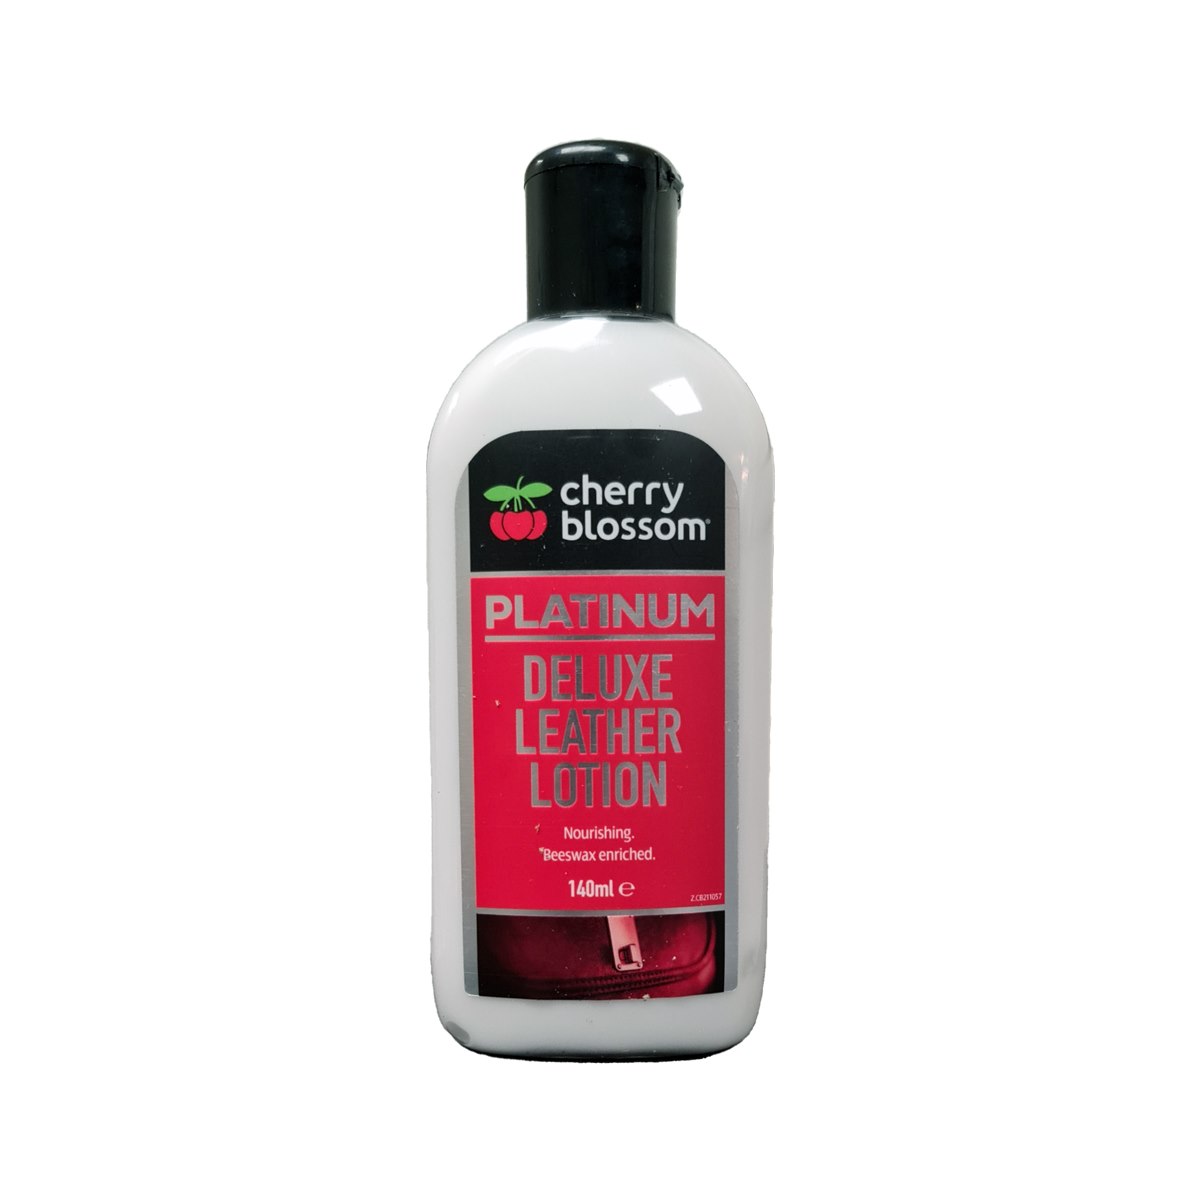 Cherry Blossom Platinum Deluxe Leather Lotion 140ml